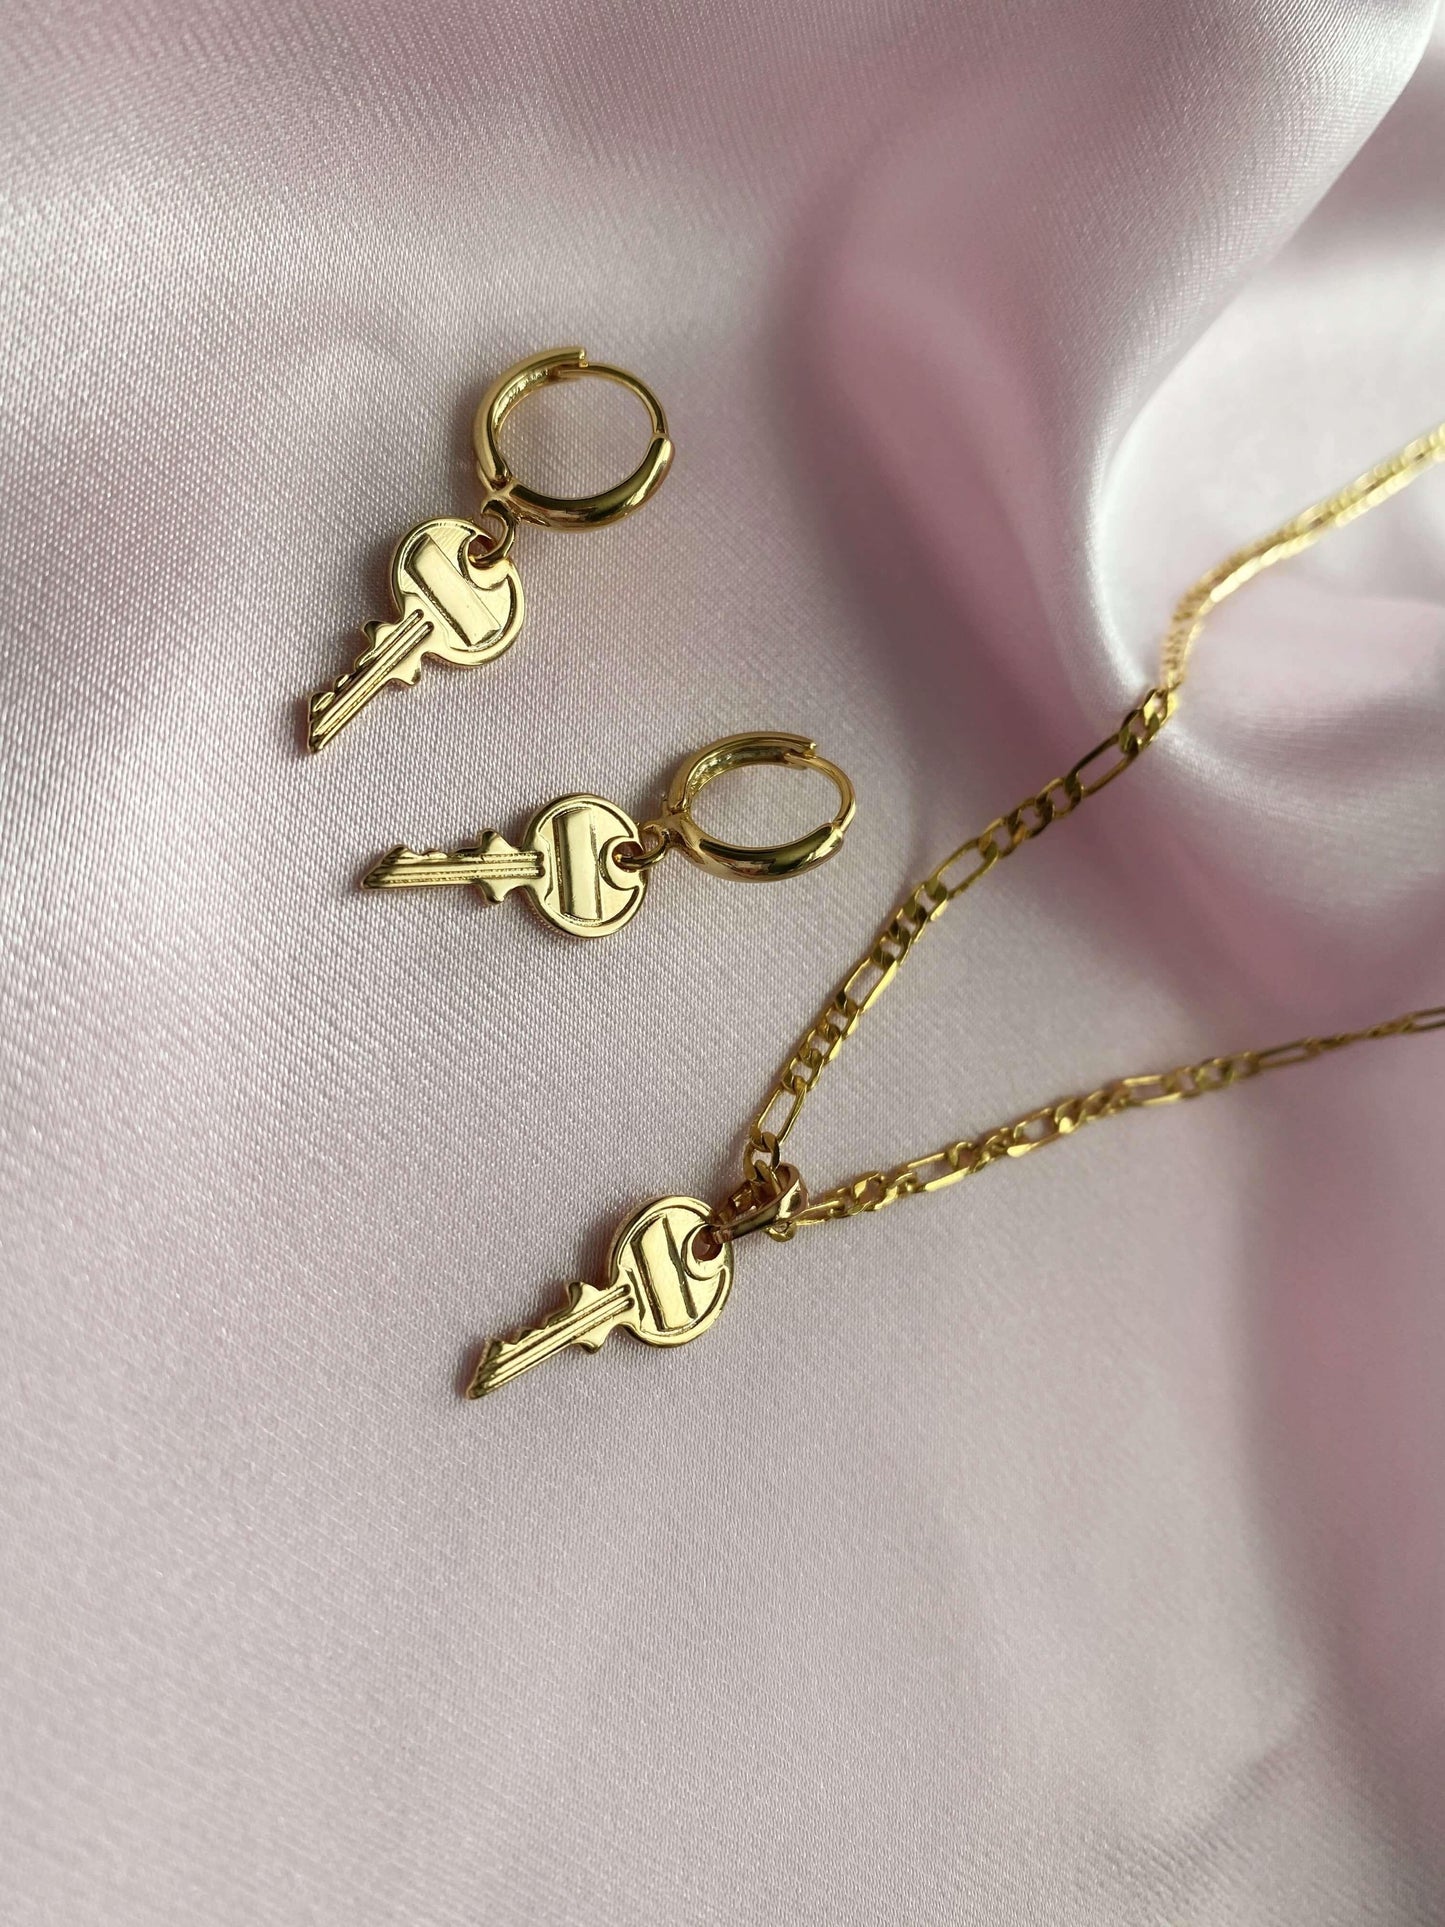 key earrings hoops huggies necklace 18k gold fill plated dainty keys to the benz